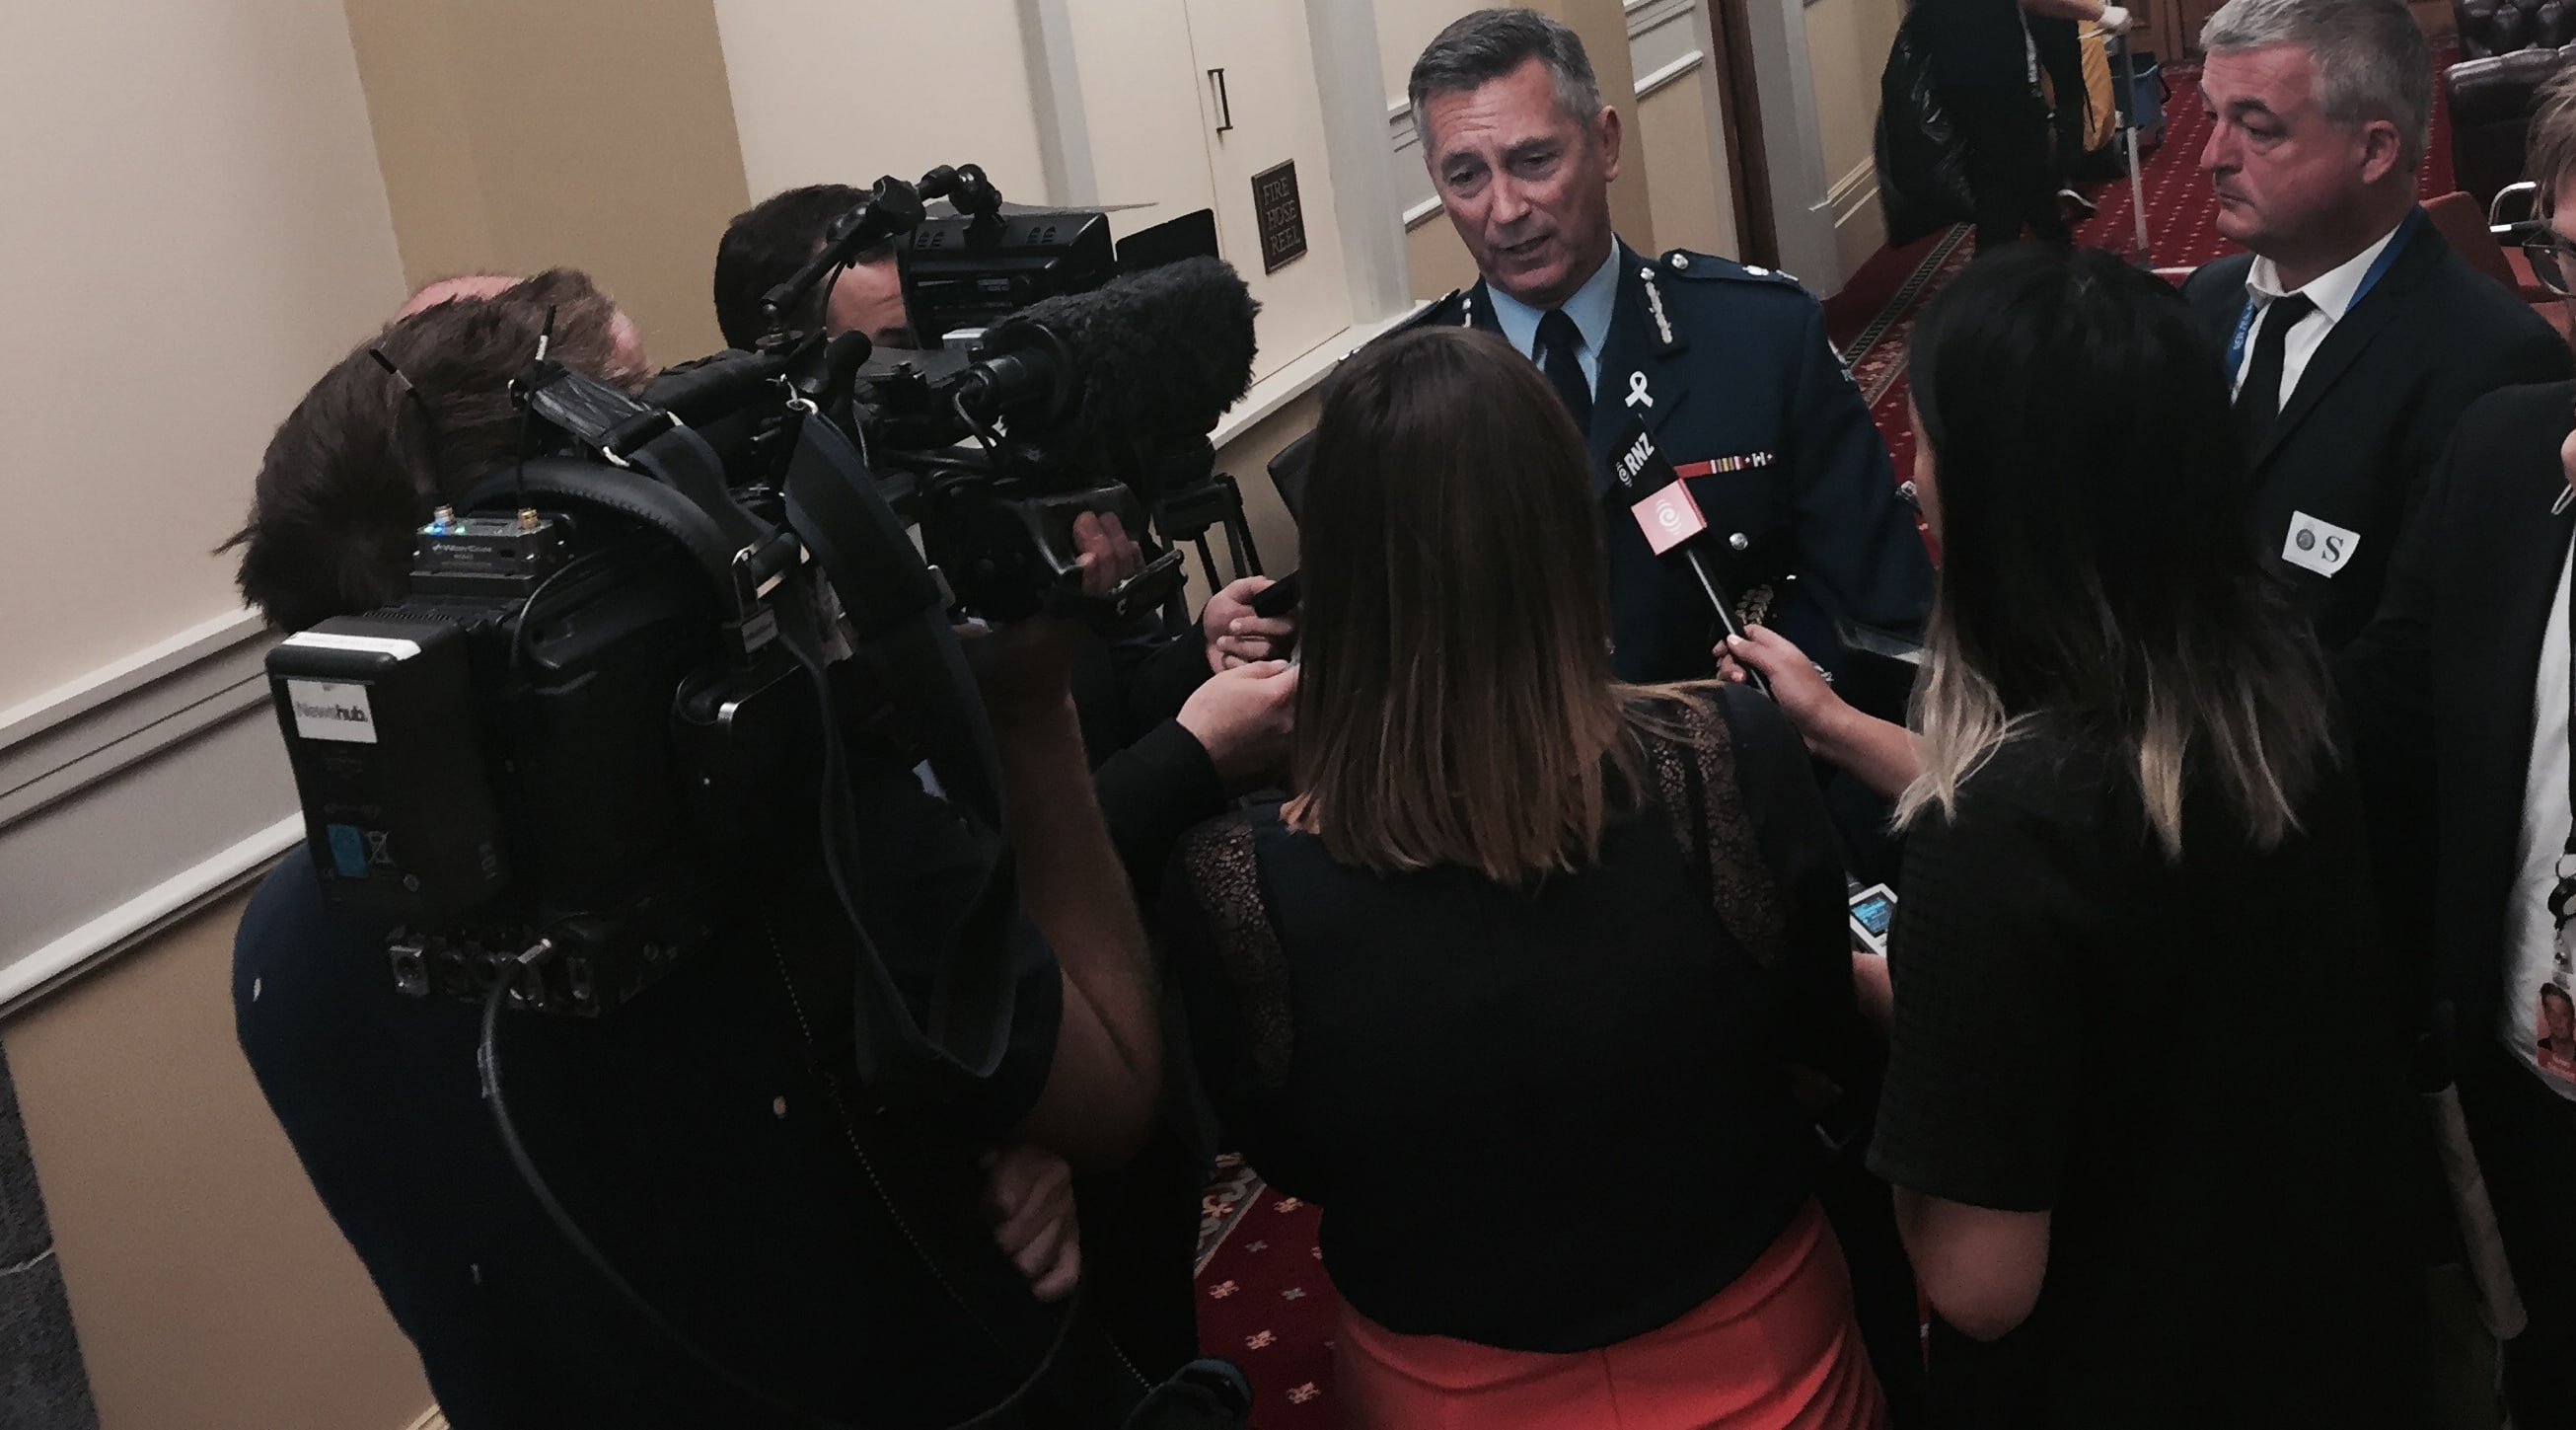 Police Commissioner Mike Bush is questioned by journalists outside a select committee room following the annual review of New Zealand Police.